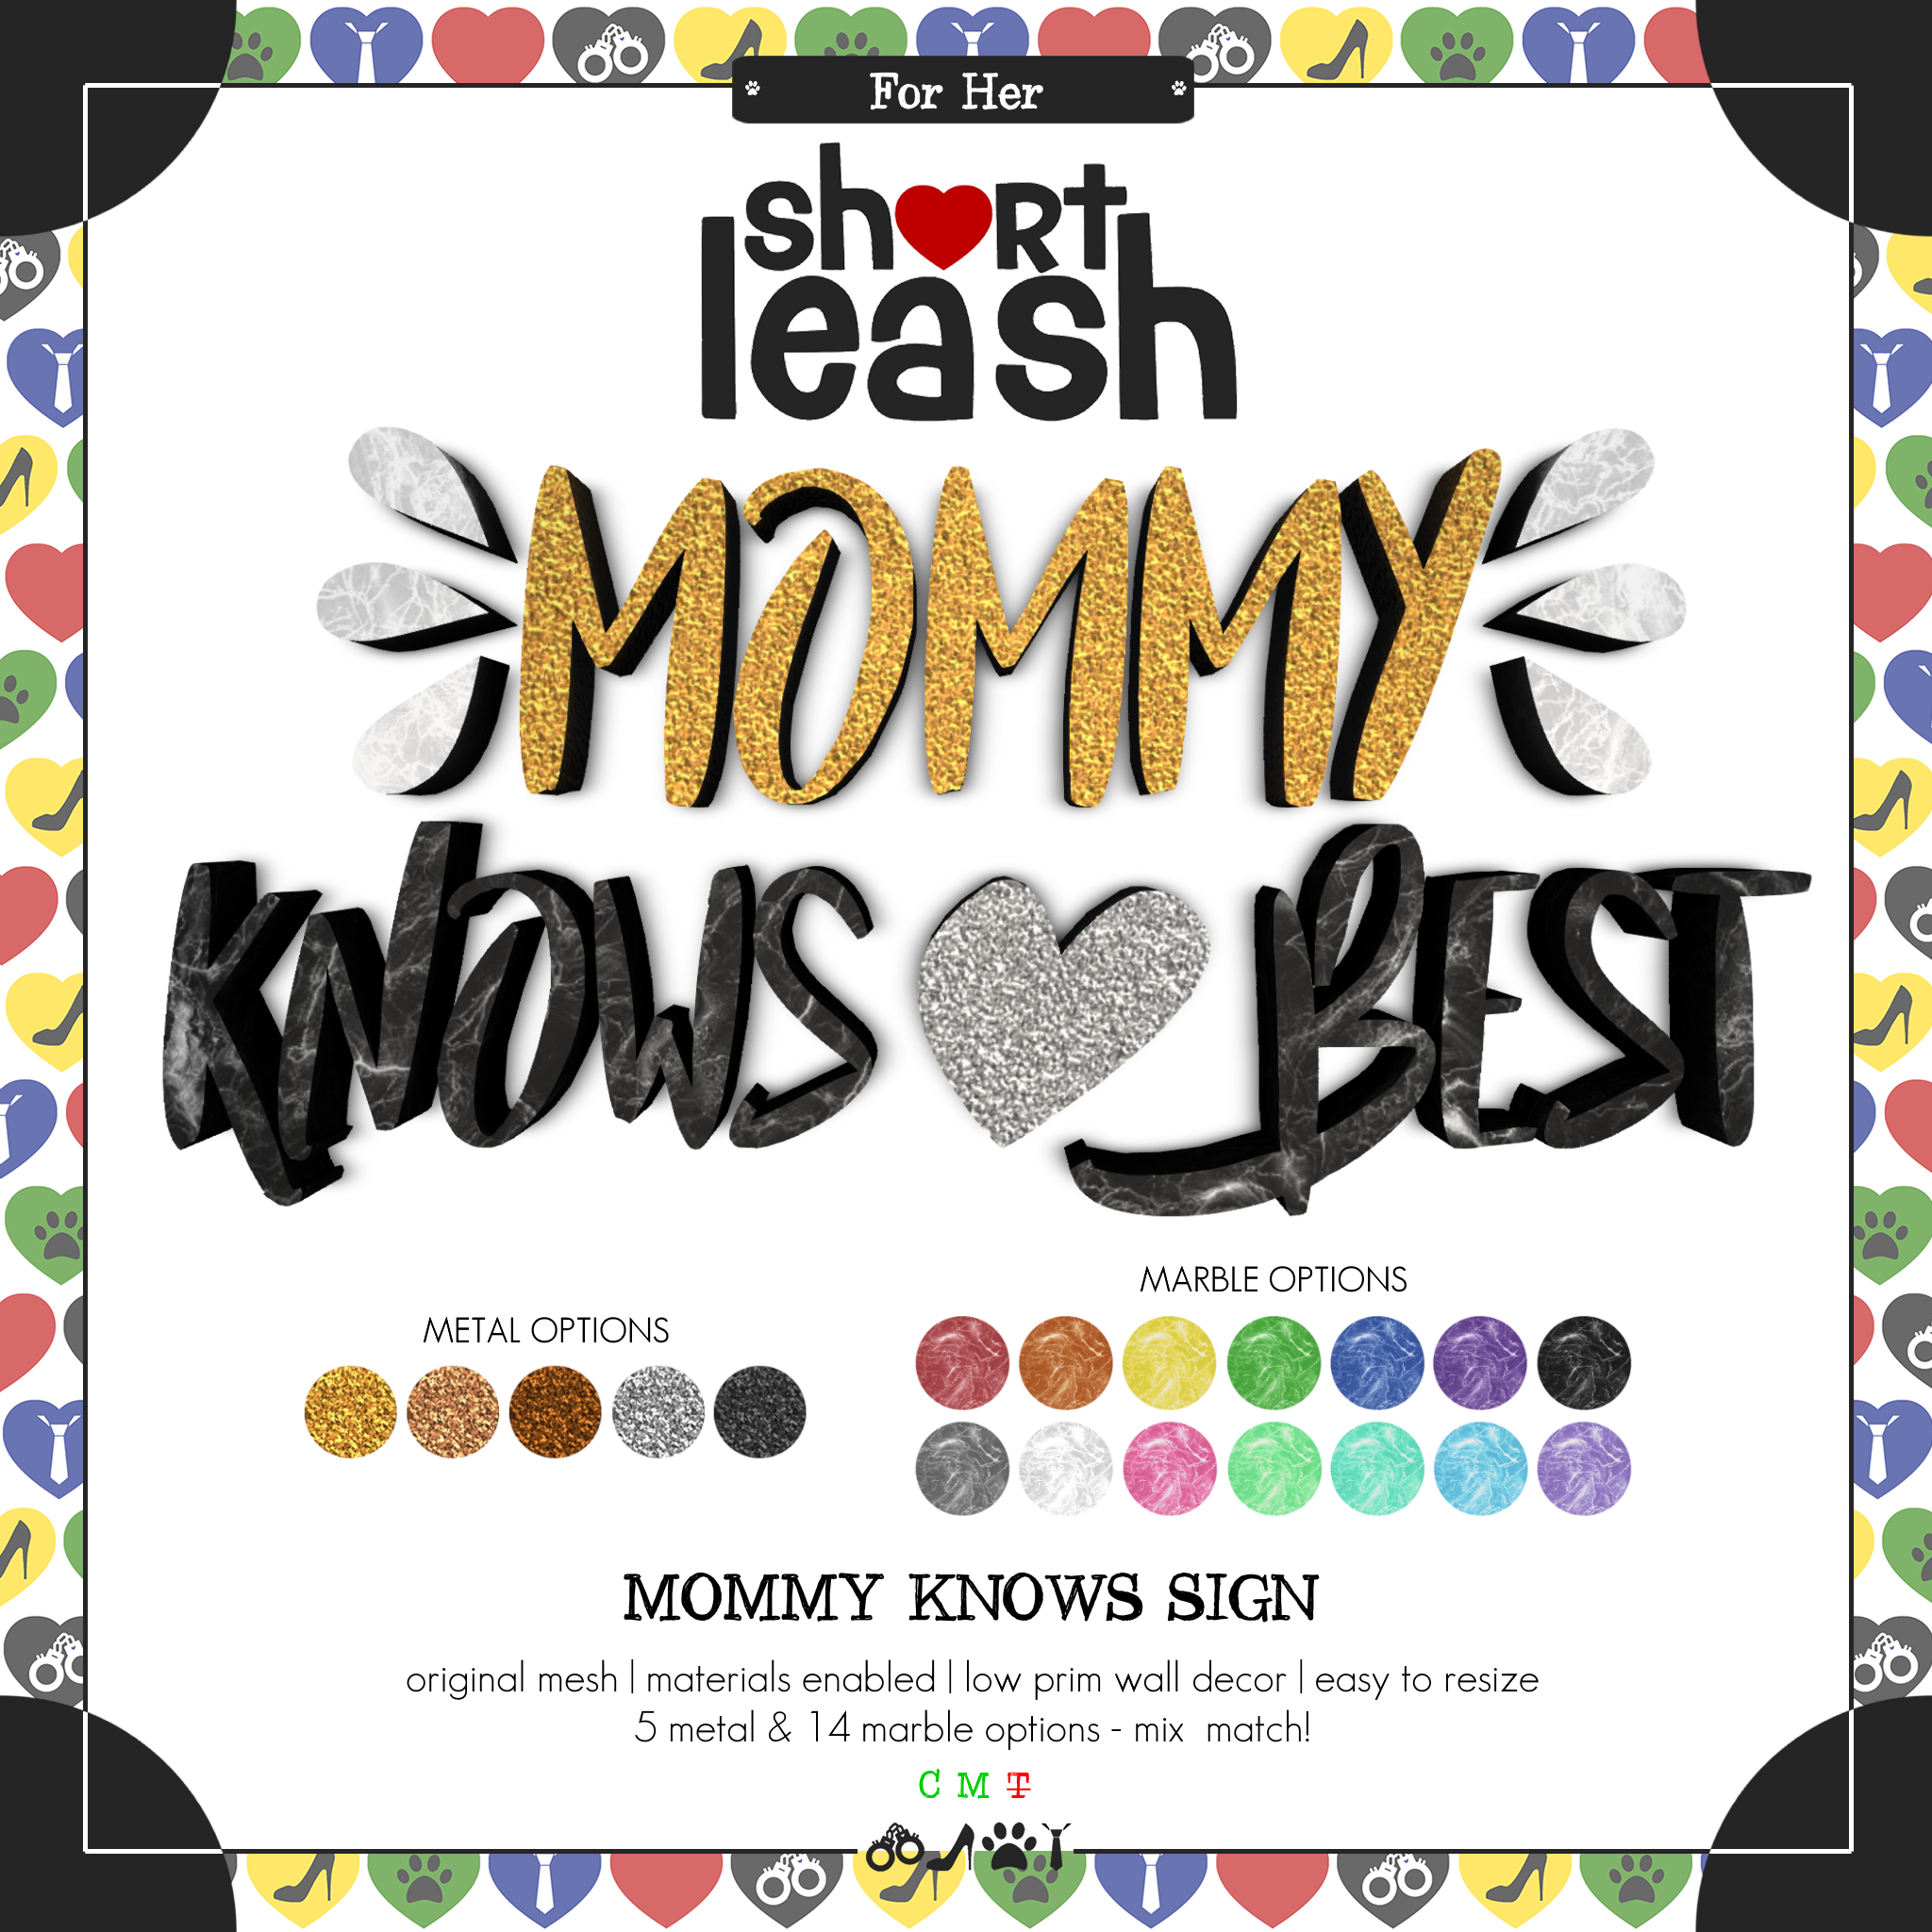 Short Leash – Mommy Knows Sign